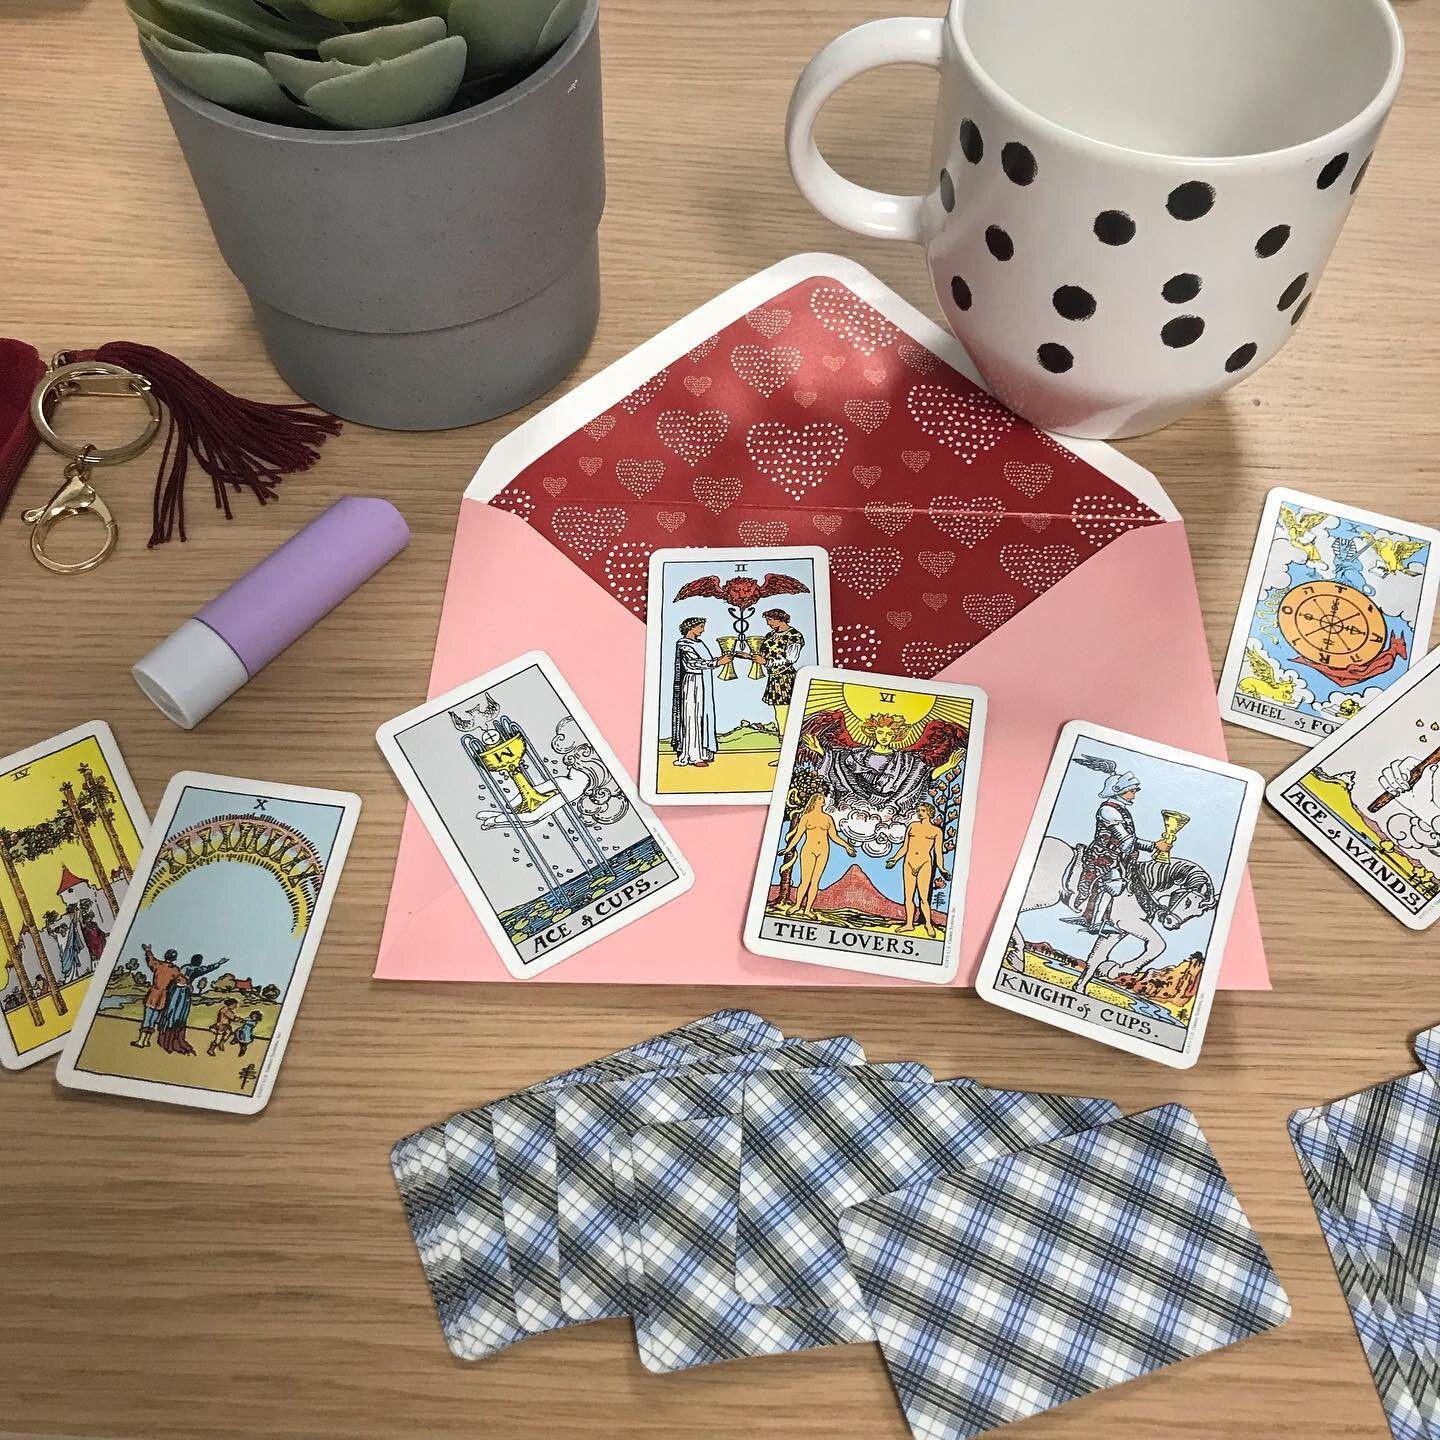 Happy Valentines Day, Gang! Hoping to return to YouTube soon for some Tarot readings! ❤️❤️❤️ #theintuitiveteacup